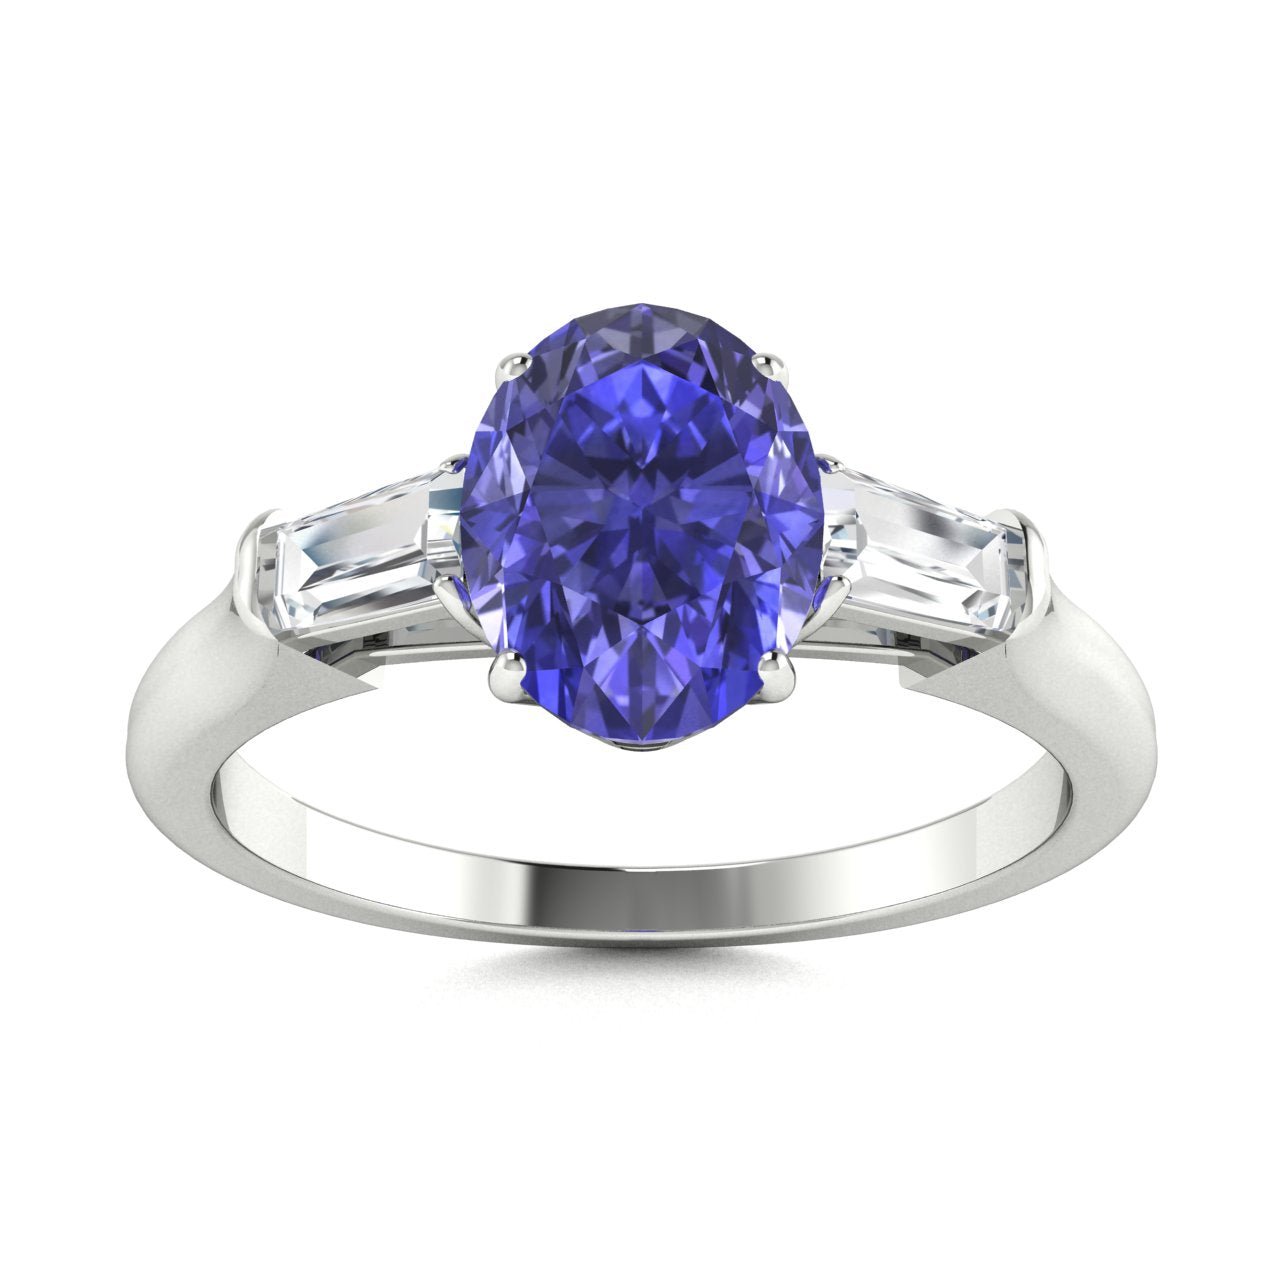 Tanzanite Ring Collection - Kay's Fine Jewelry